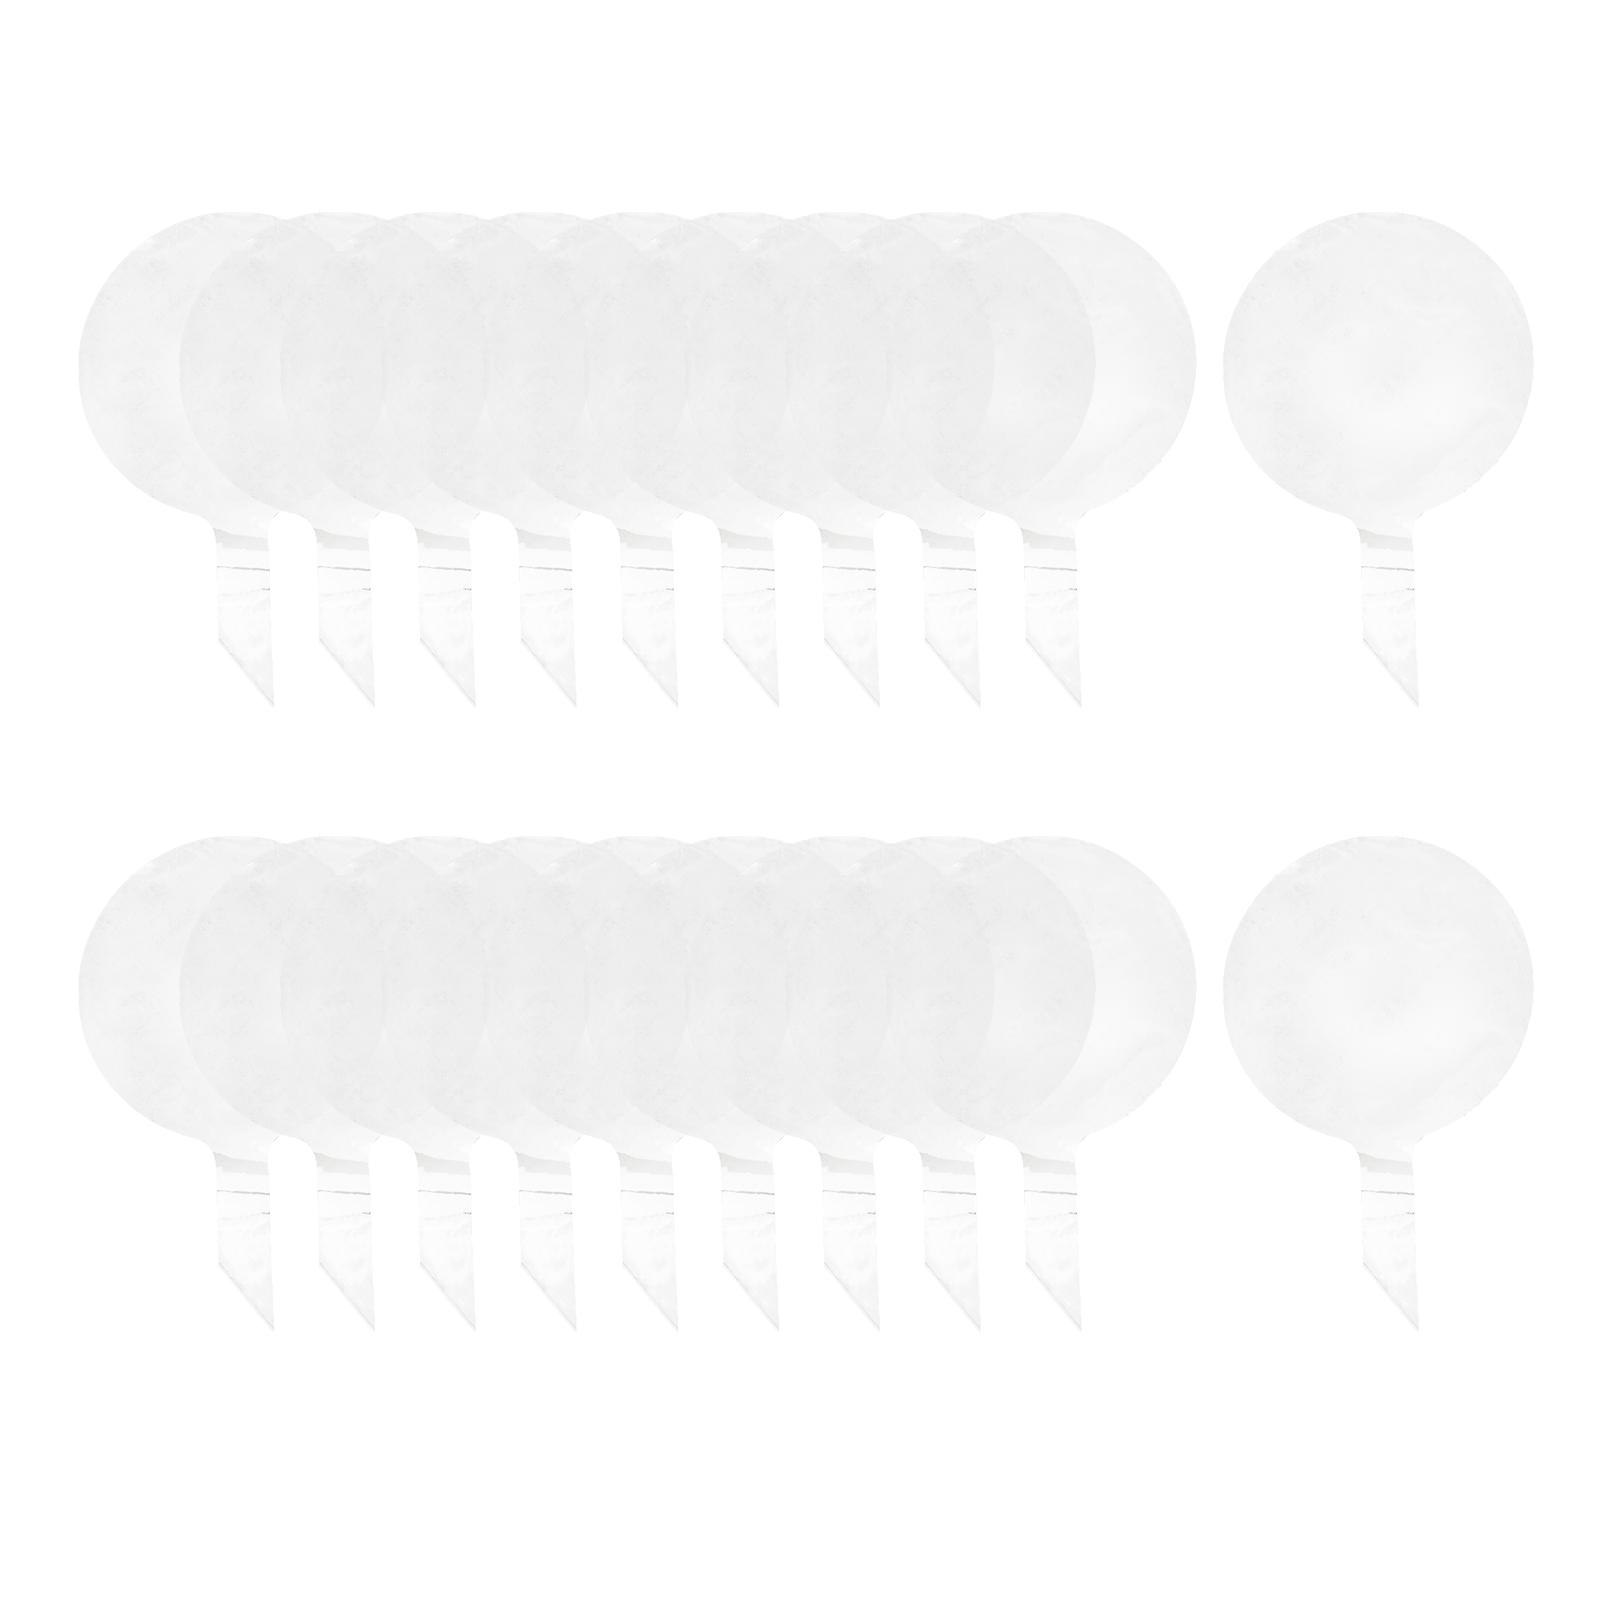 20X Praty Bobo Balloons Wide Mouth Bobo Balloons Party Favors Pre Stretched Transparent Bubble Bobo Balloons for Valentine's Day Wedding Pool 12inch